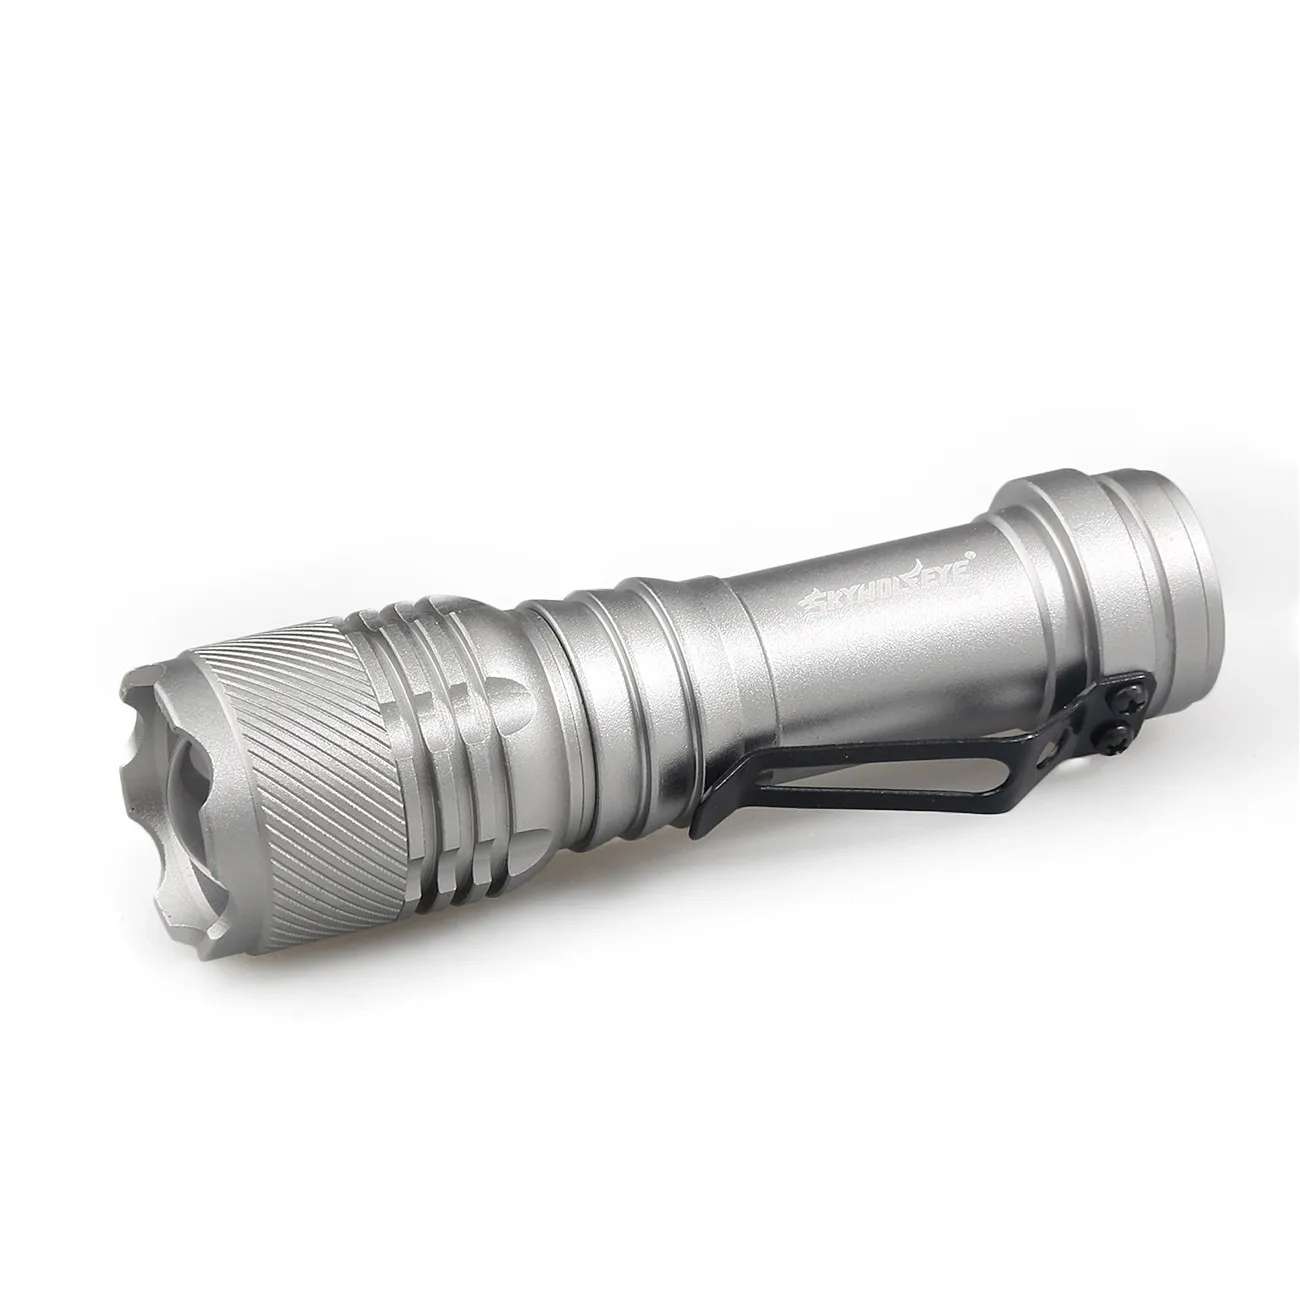 

New Waterproof Aluminum Alloy 2000LM Q5 AA/14500 3 Modes ZOOMABLE LED Flashlight Torch Super Bright Lifespan 100000 hours